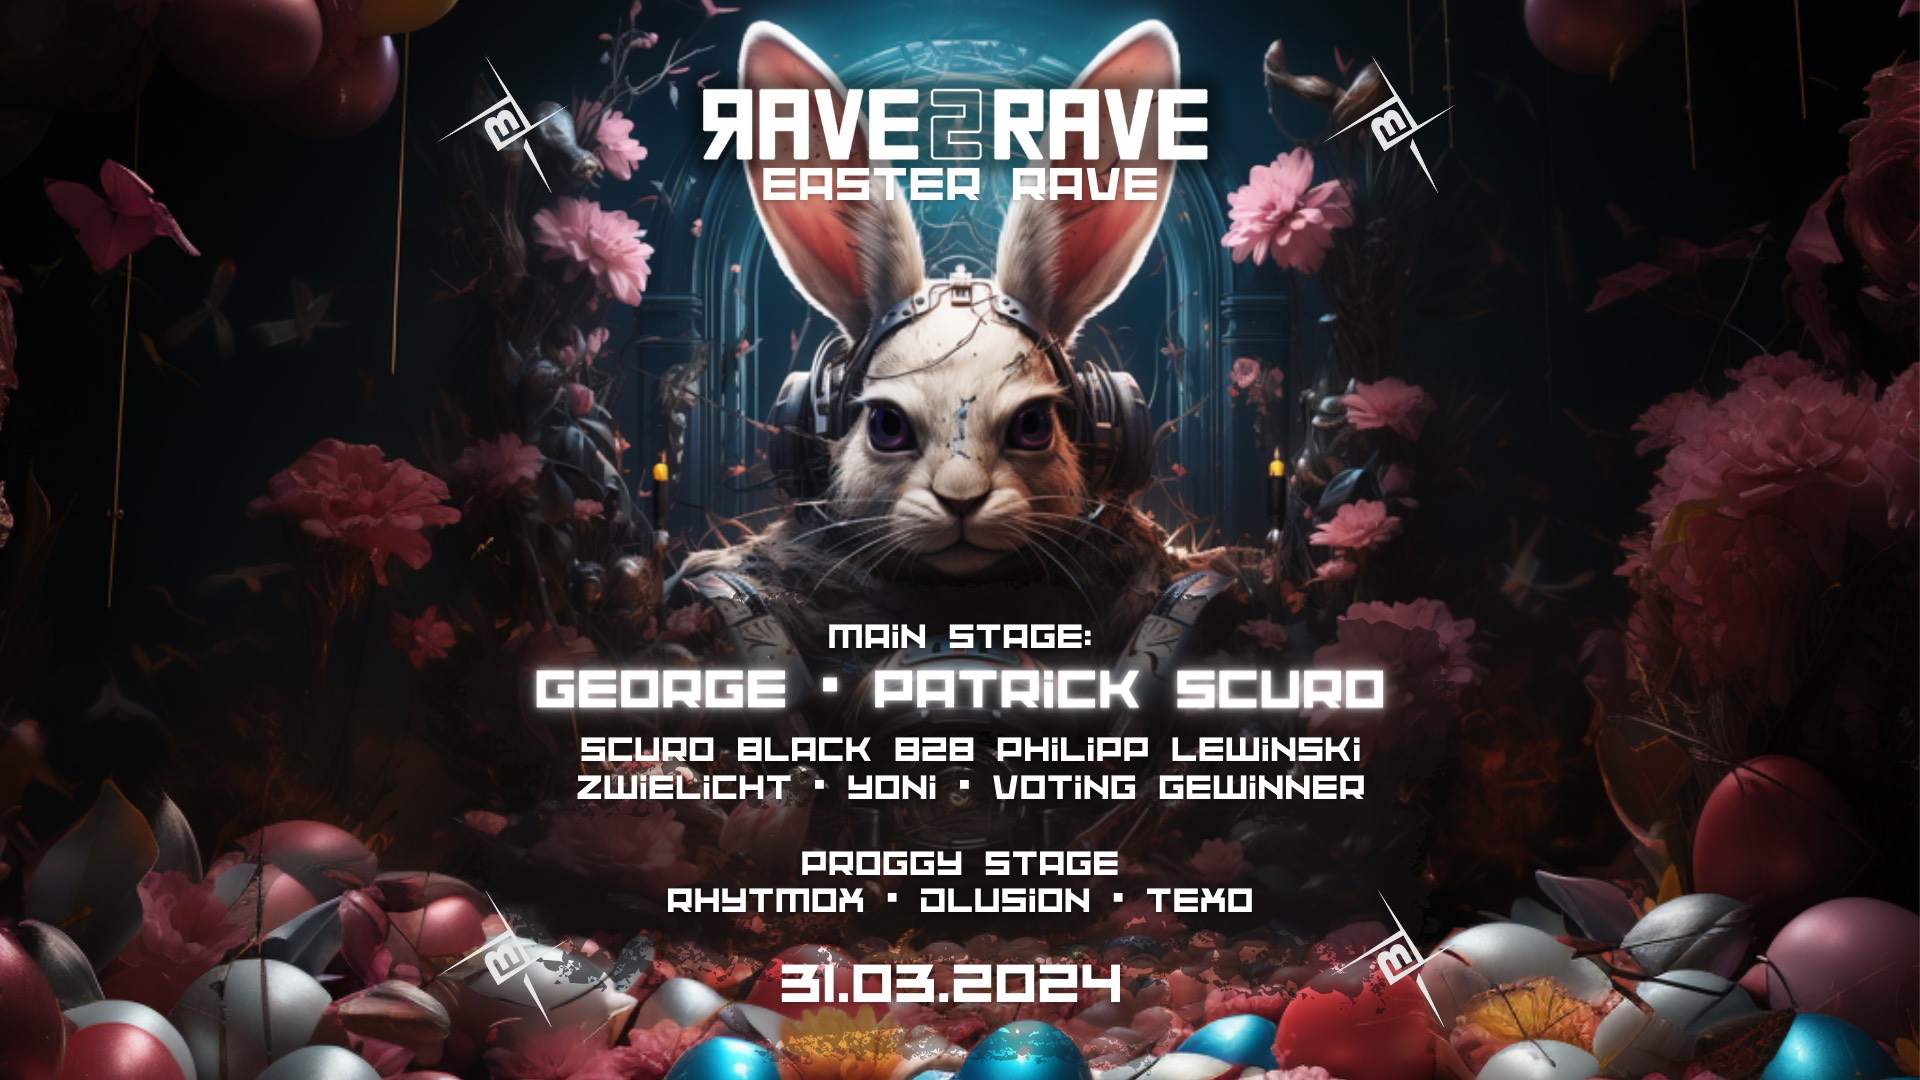 Rave2Rave - Easter Rave with George, Patrick Scuro and many more - Página frontal